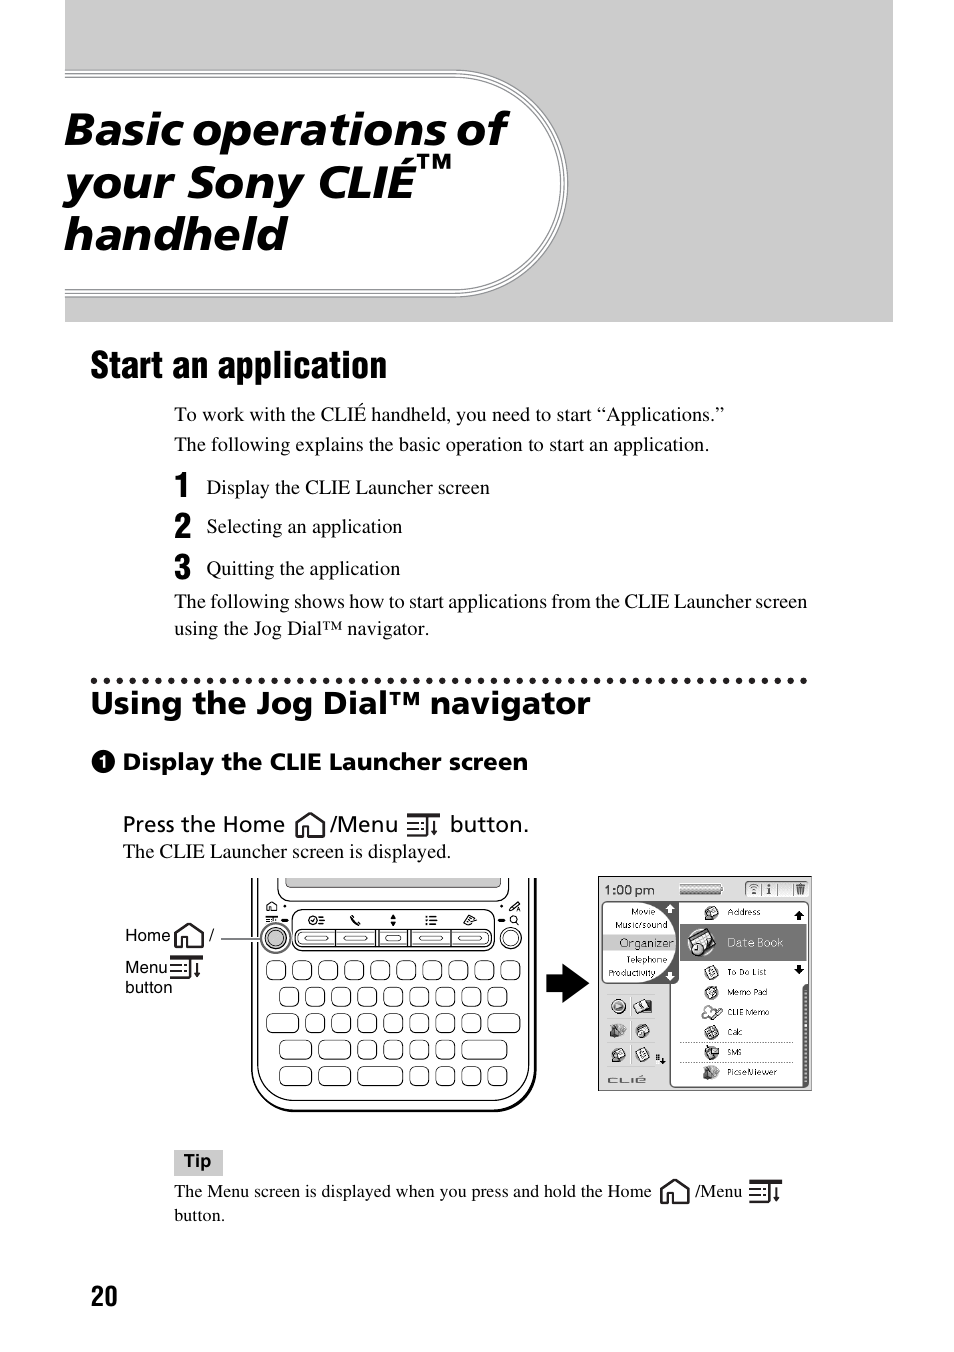 Basic operations of your sony clié™ handheld, Start an application, Using the jog dial™ navigator | Basic operations of your sony clié, Handheld | Sony PEG-TG50 User Manual | Page 20 / 100